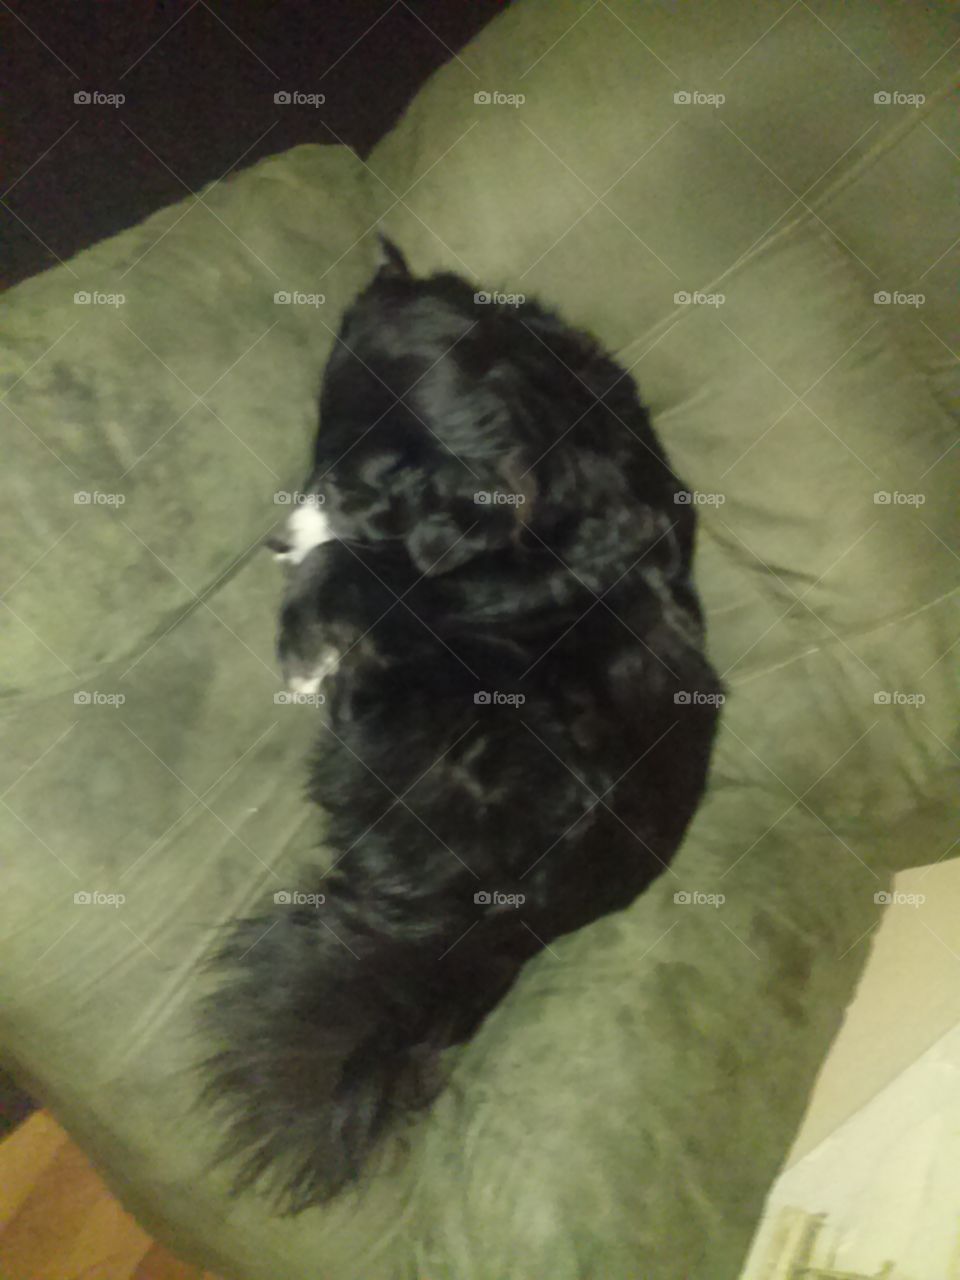 my dog. her name is Missy she loves to sleep in this chair